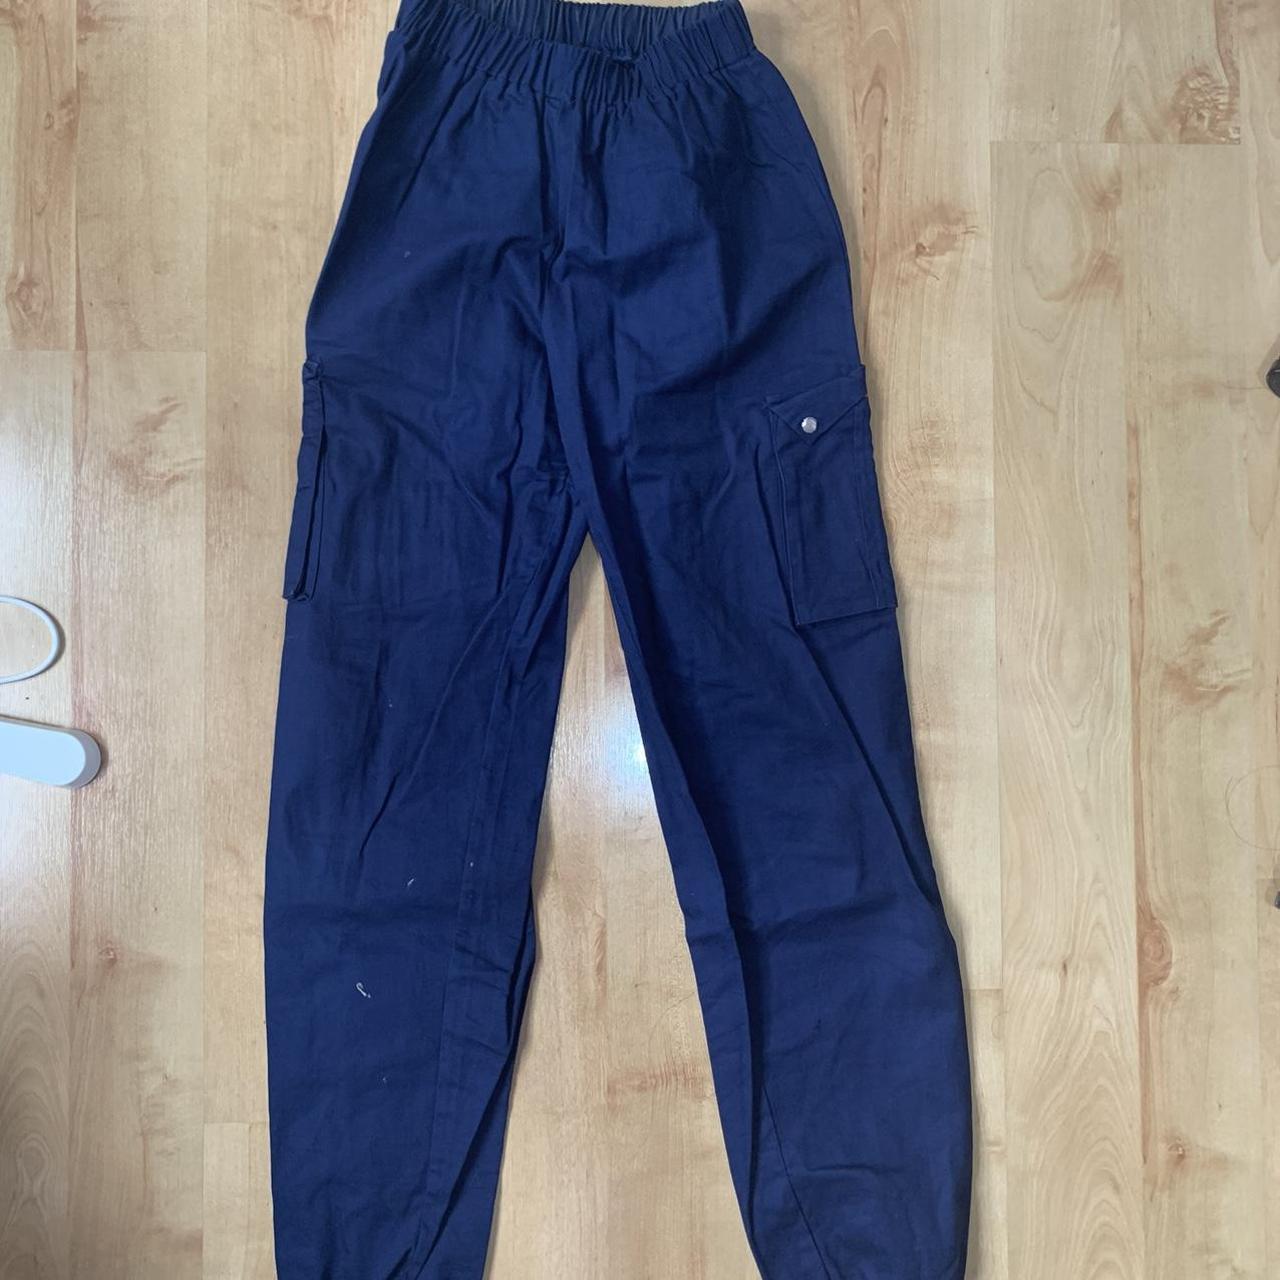 Pretty little thing navy cargos in size 6, some... - Depop